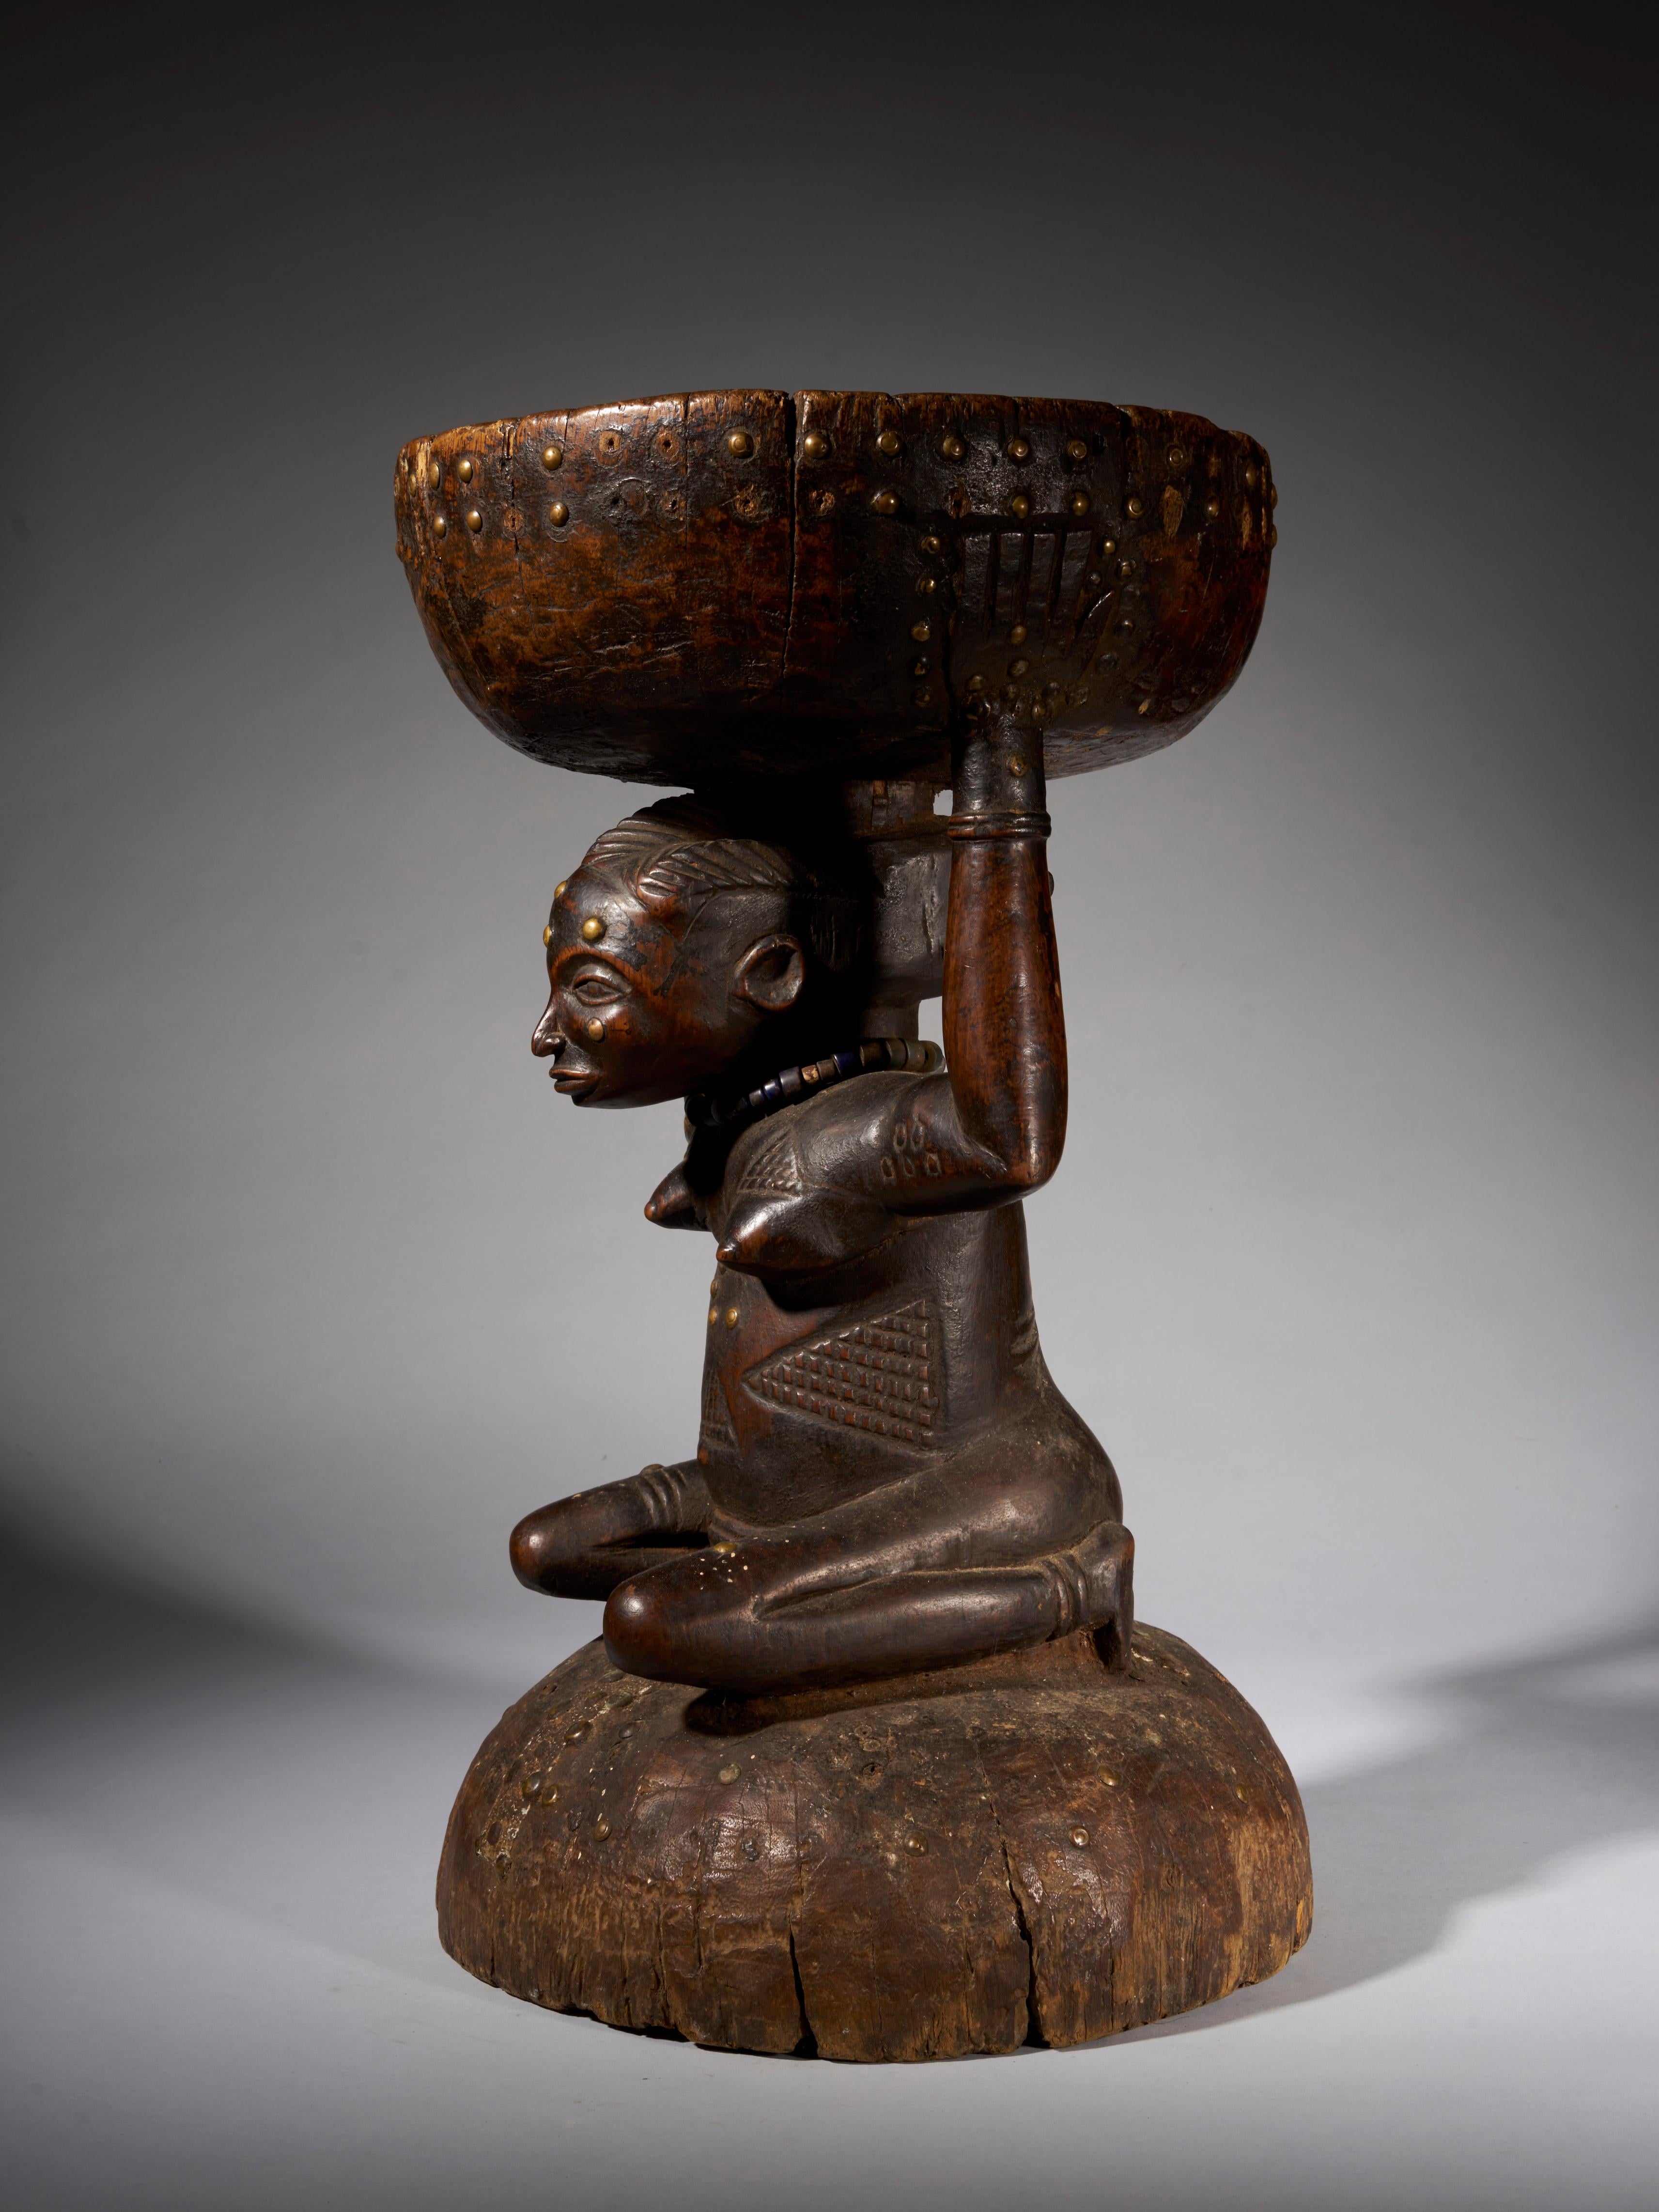 The stool represented here is a typical Caryatide stool of the Zela people in the Democratic Republic of Congo. The stool is carved out of wood and is held up by a kneeling woman covered with typical Zela scarifications,showing her high ranking